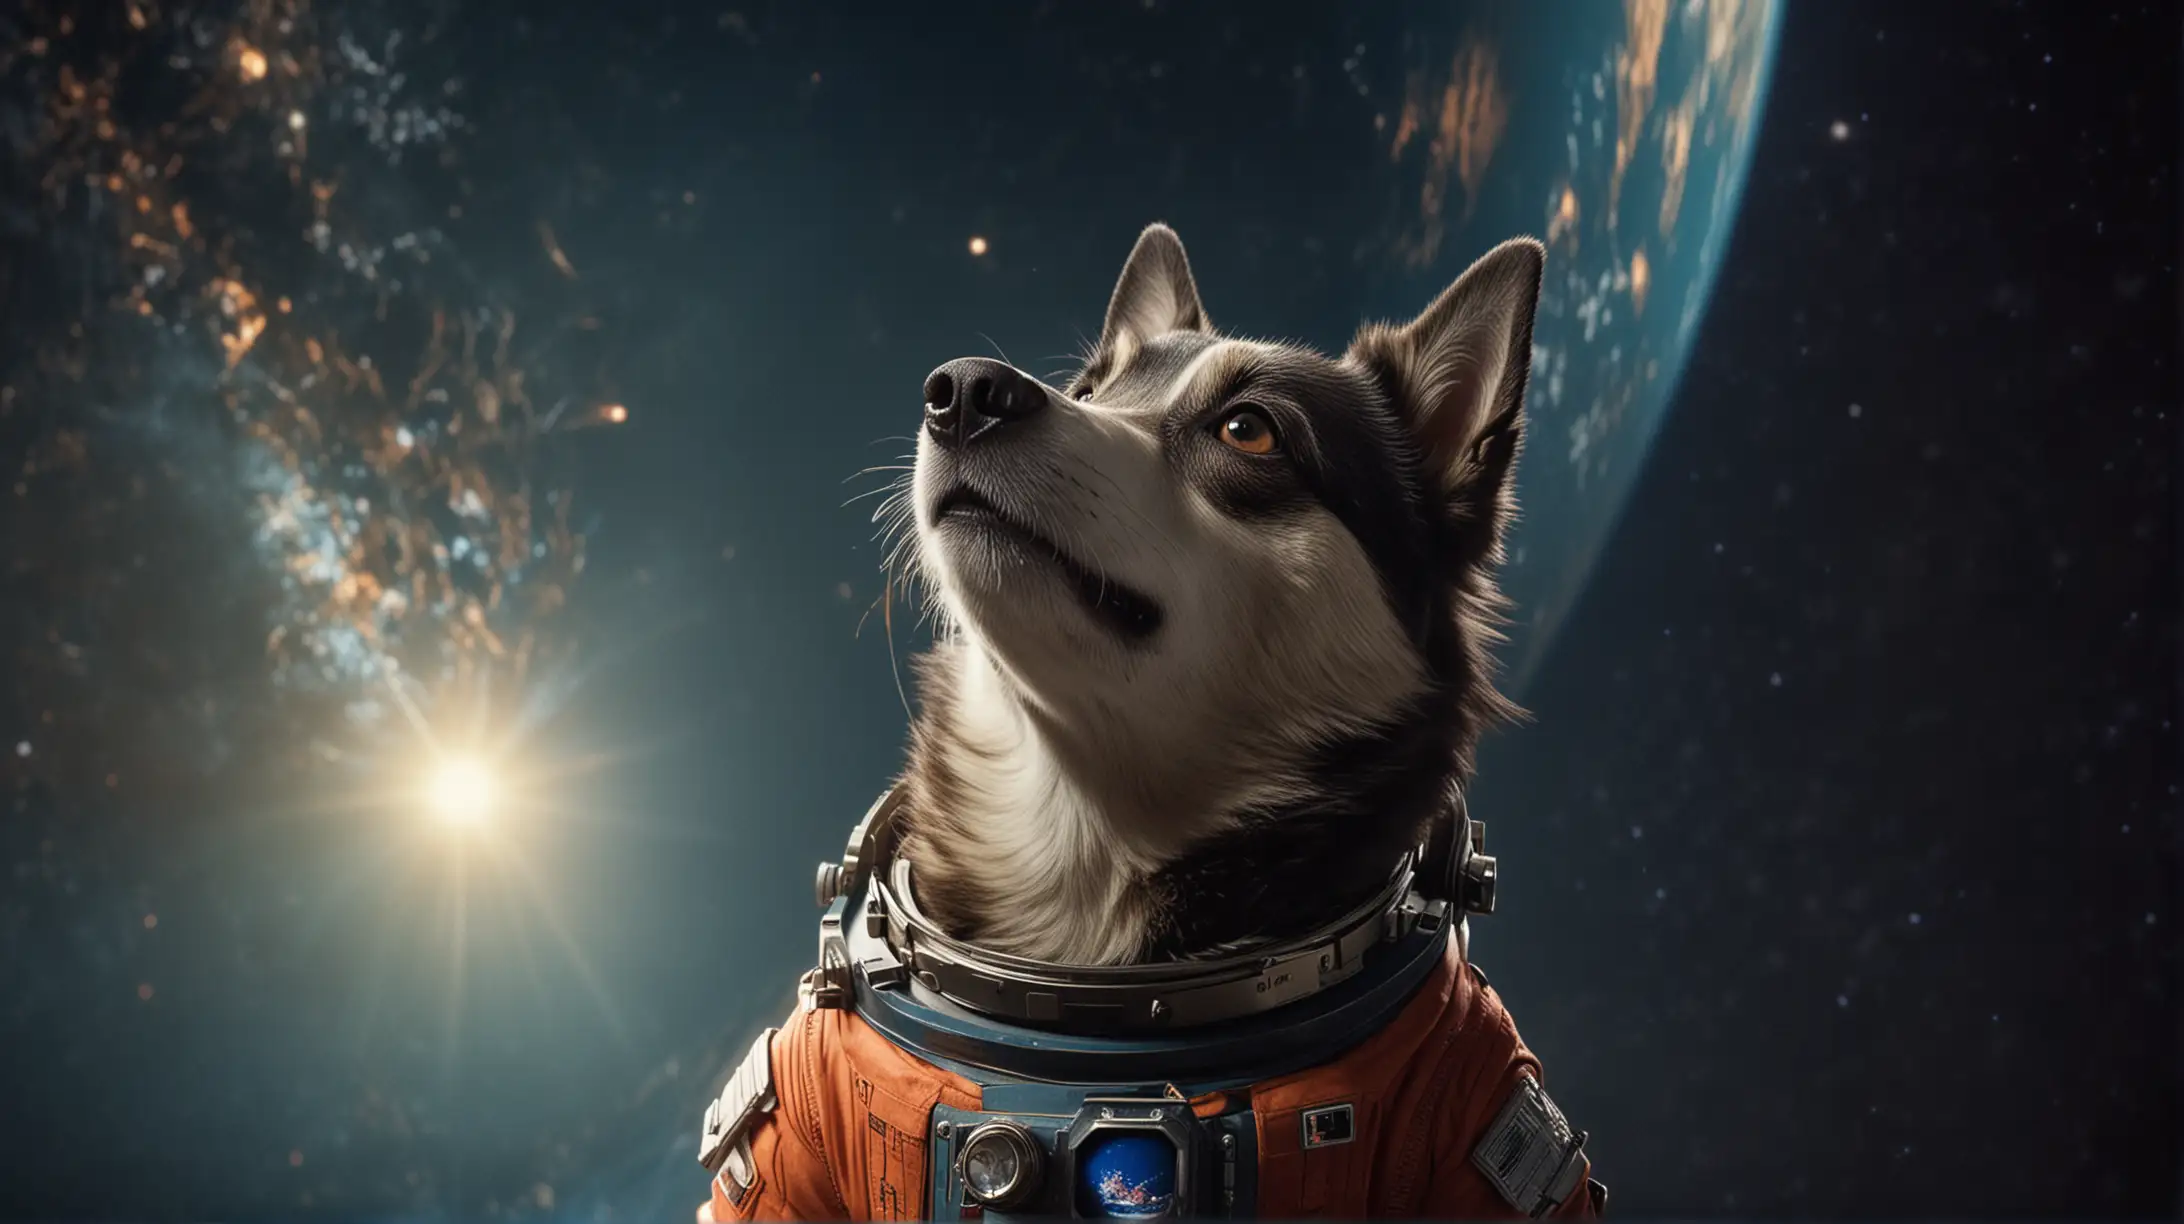 wide mastershot of laika the space female dog in space costume , looking at earth with hope